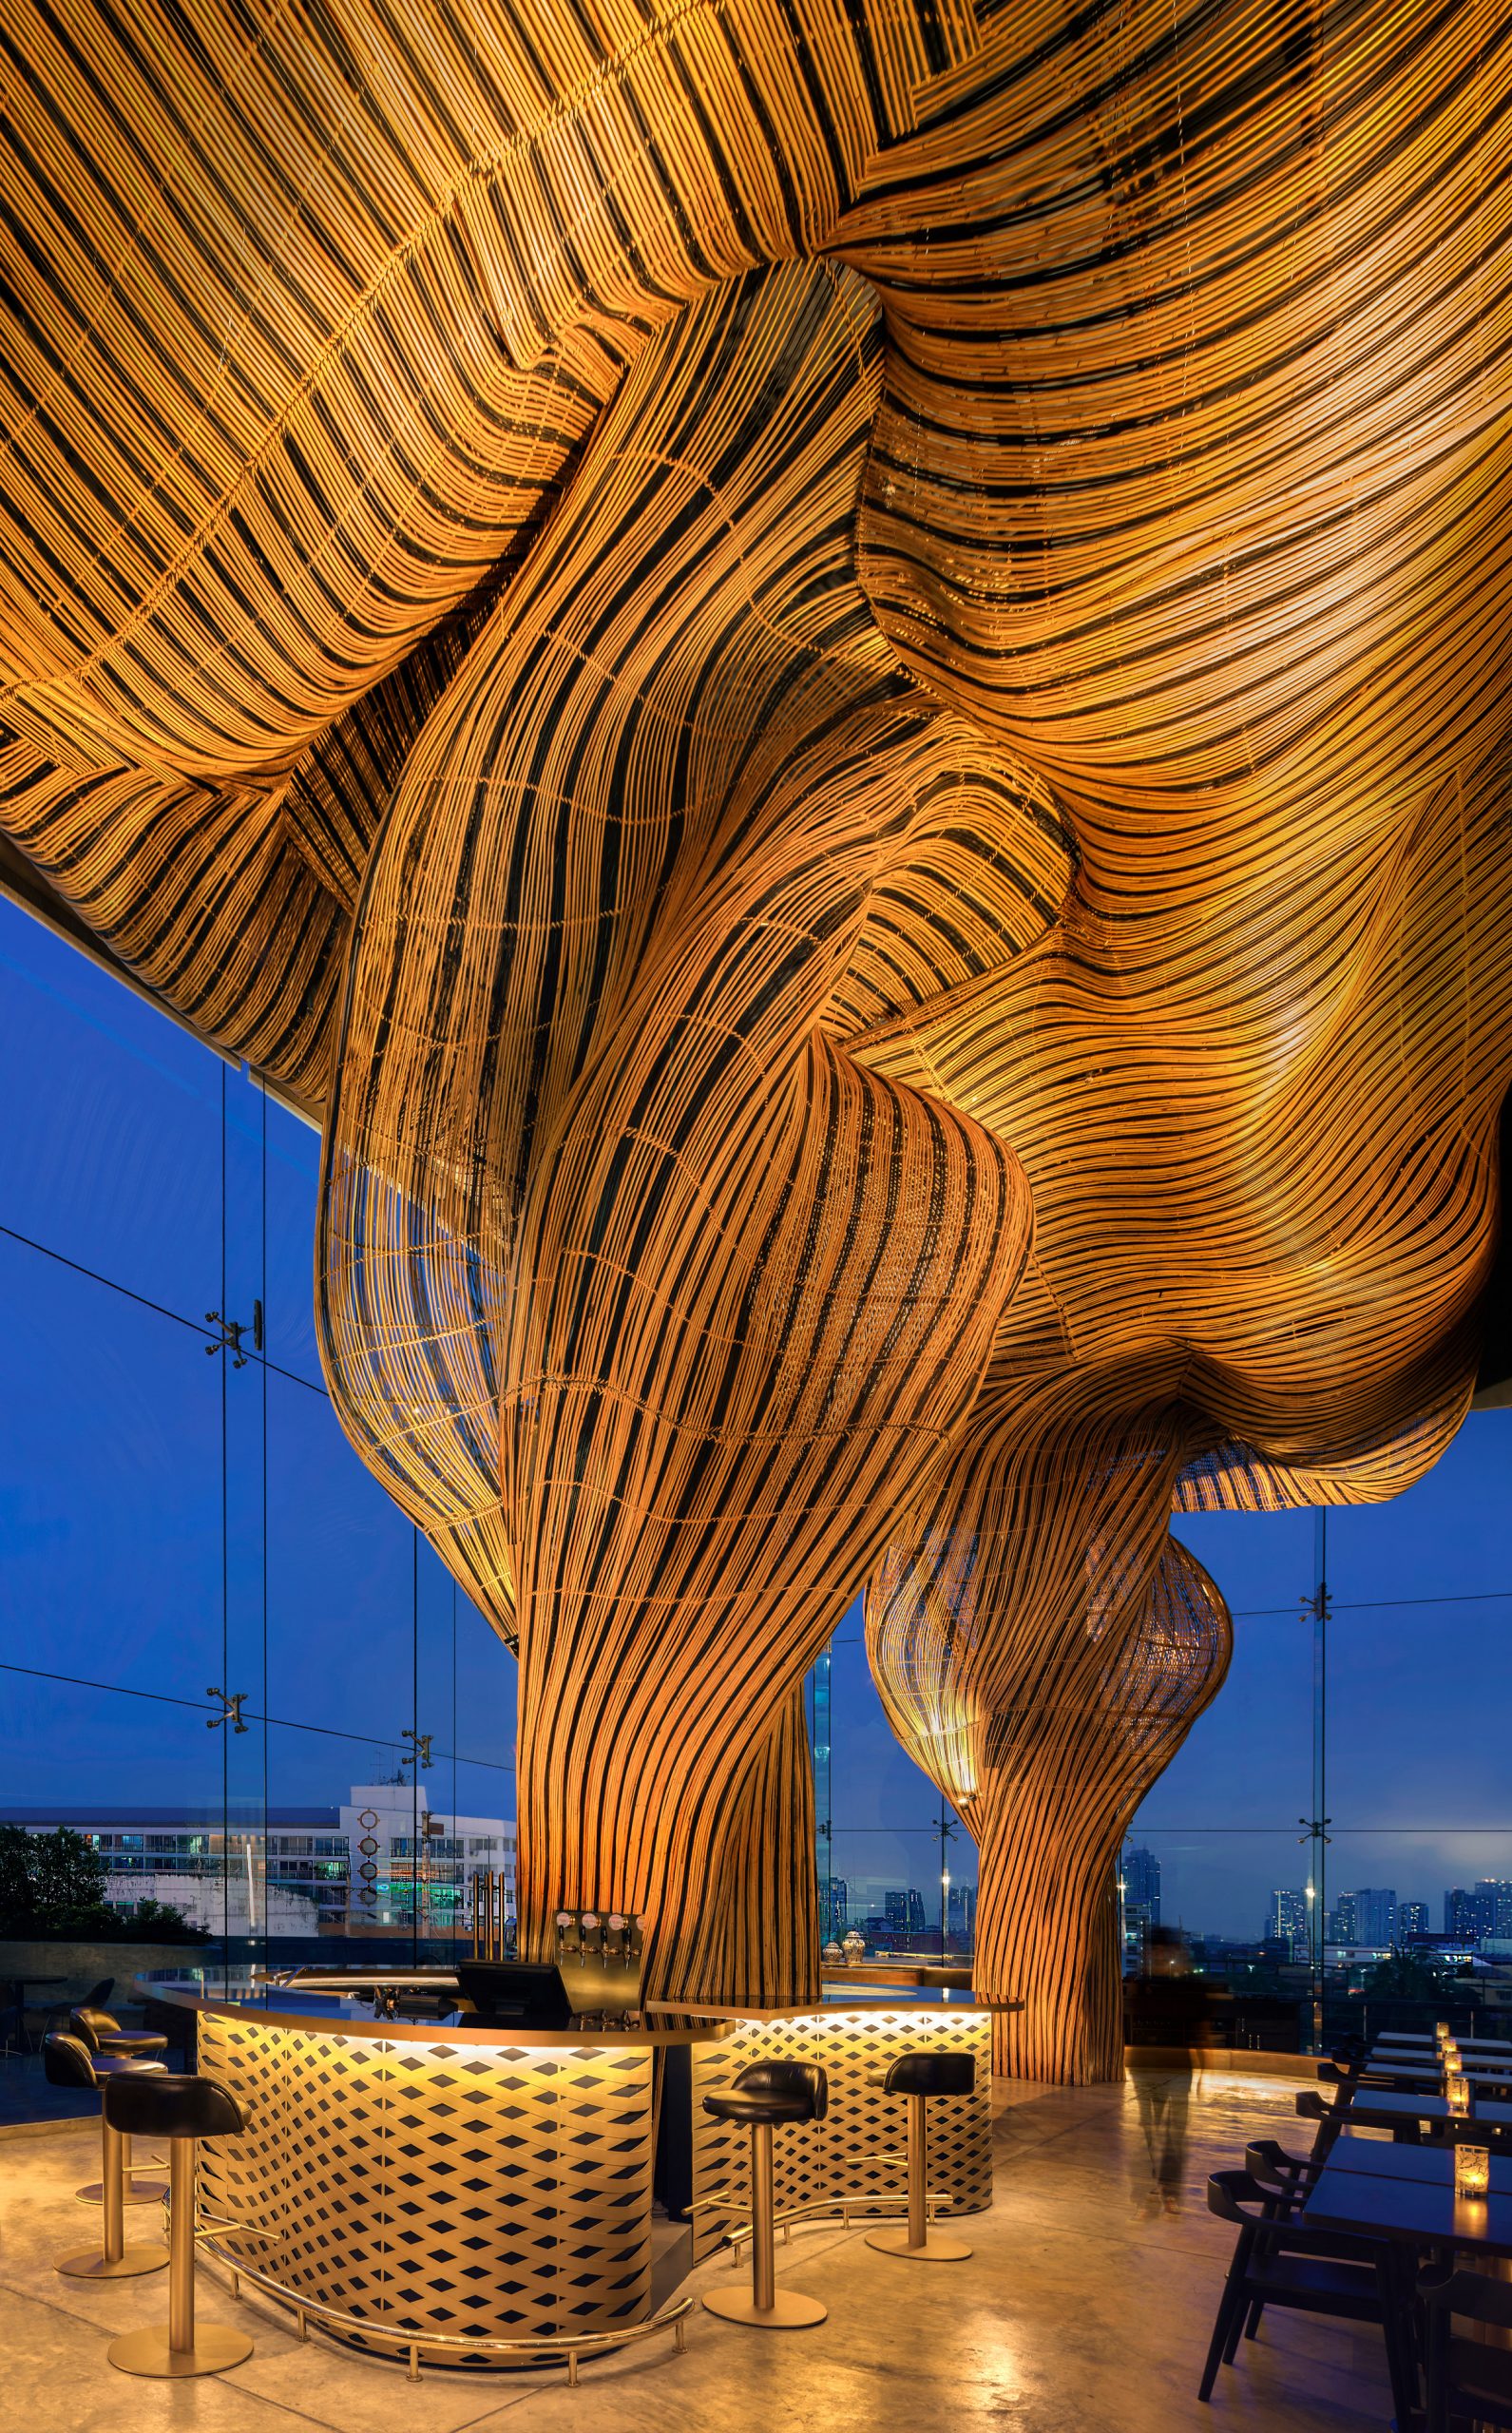 Rattan sculptures at Spice and Barley by Enter Projects Asia